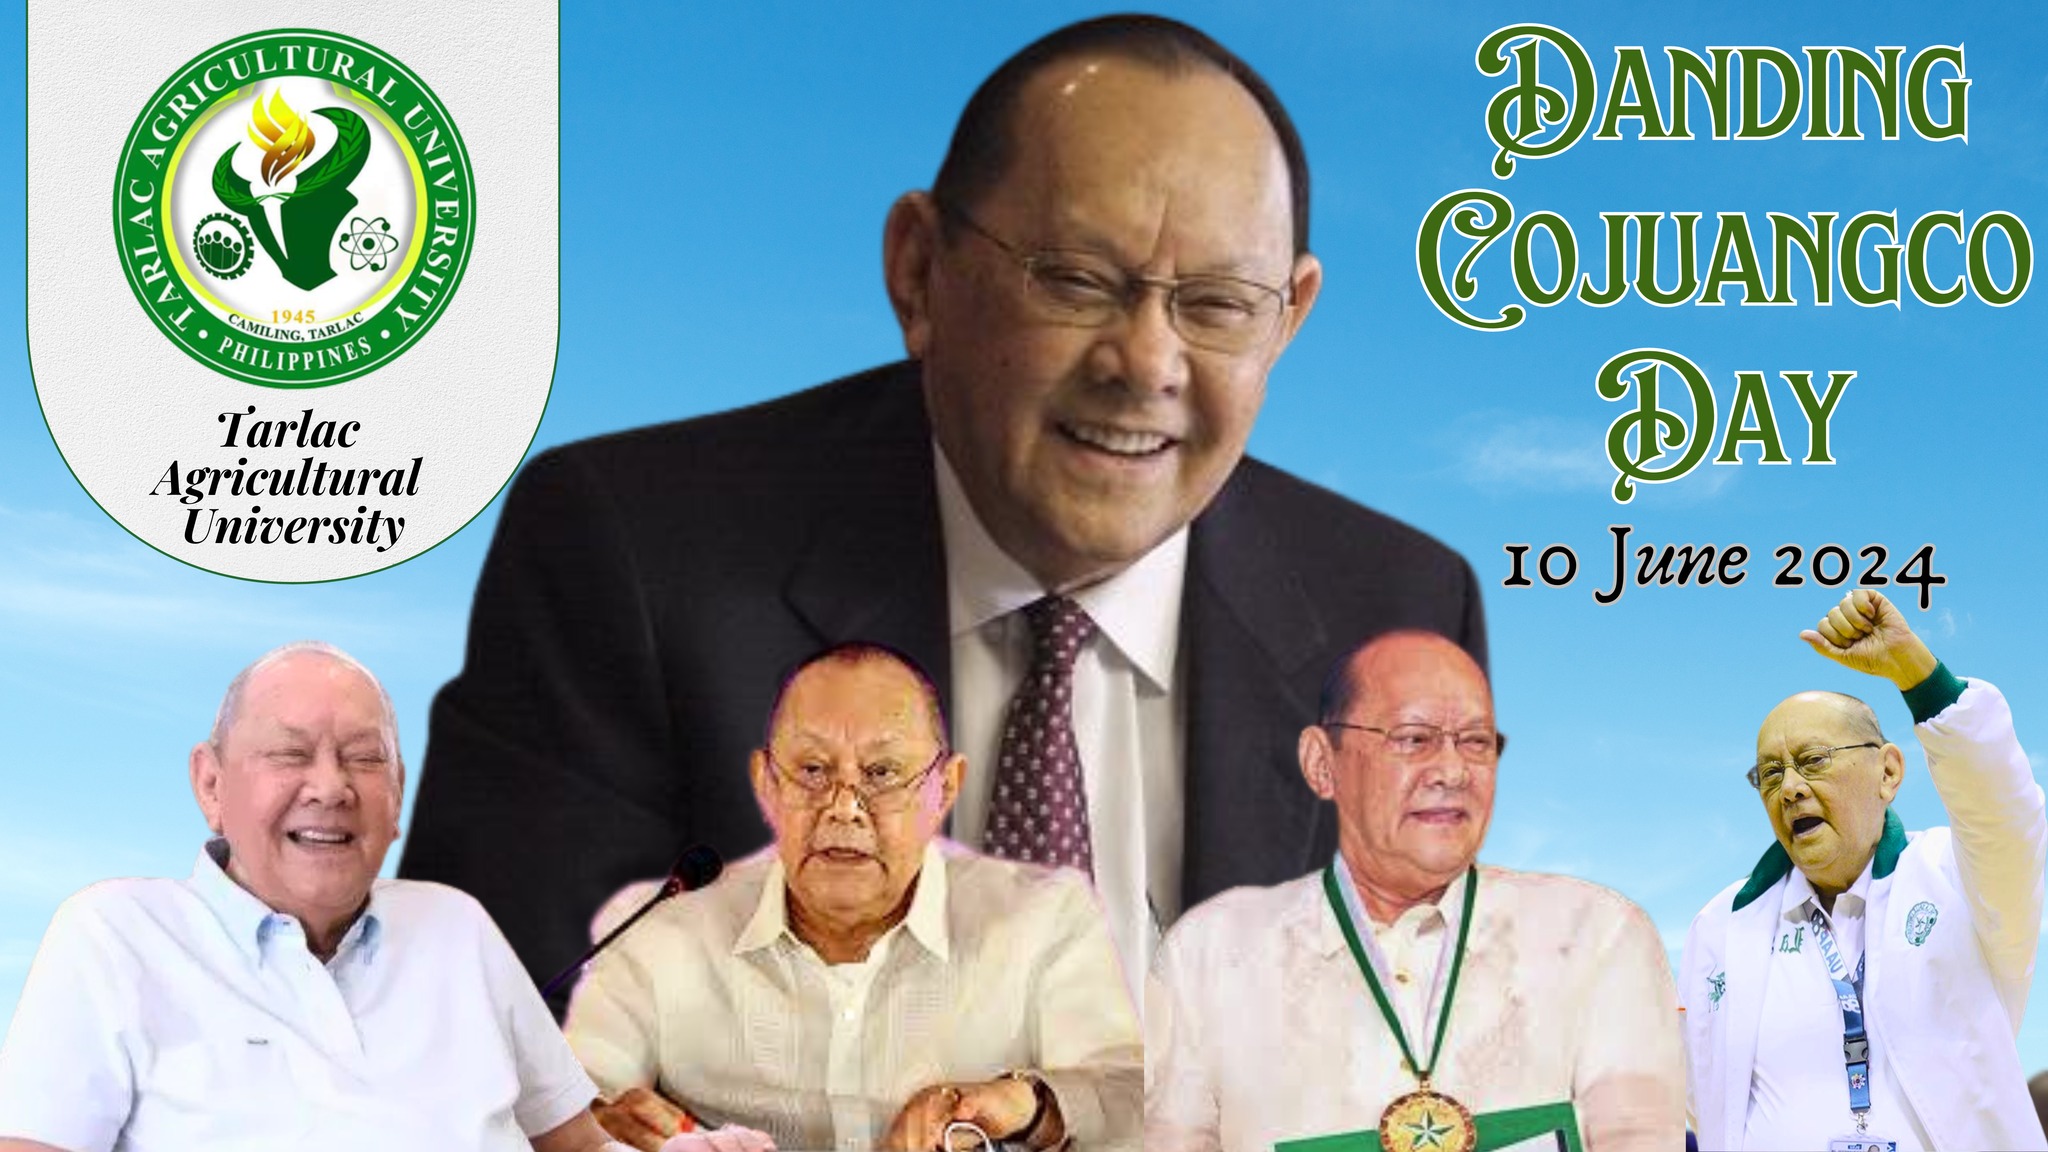 𝐔𝐍𝐈𝐕𝐄𝐑𝐒𝐈𝐓𝐘 𝐁𝐔𝐋𝐋𝐄𝐓𝐈𝐍 | Tarlac Agricultural University commemorating the late Ambassador Eduardo "Danding" Murphy Cojuangco, Jr.'s birth anniversary, as stipulated in the Republic Act No. 11729